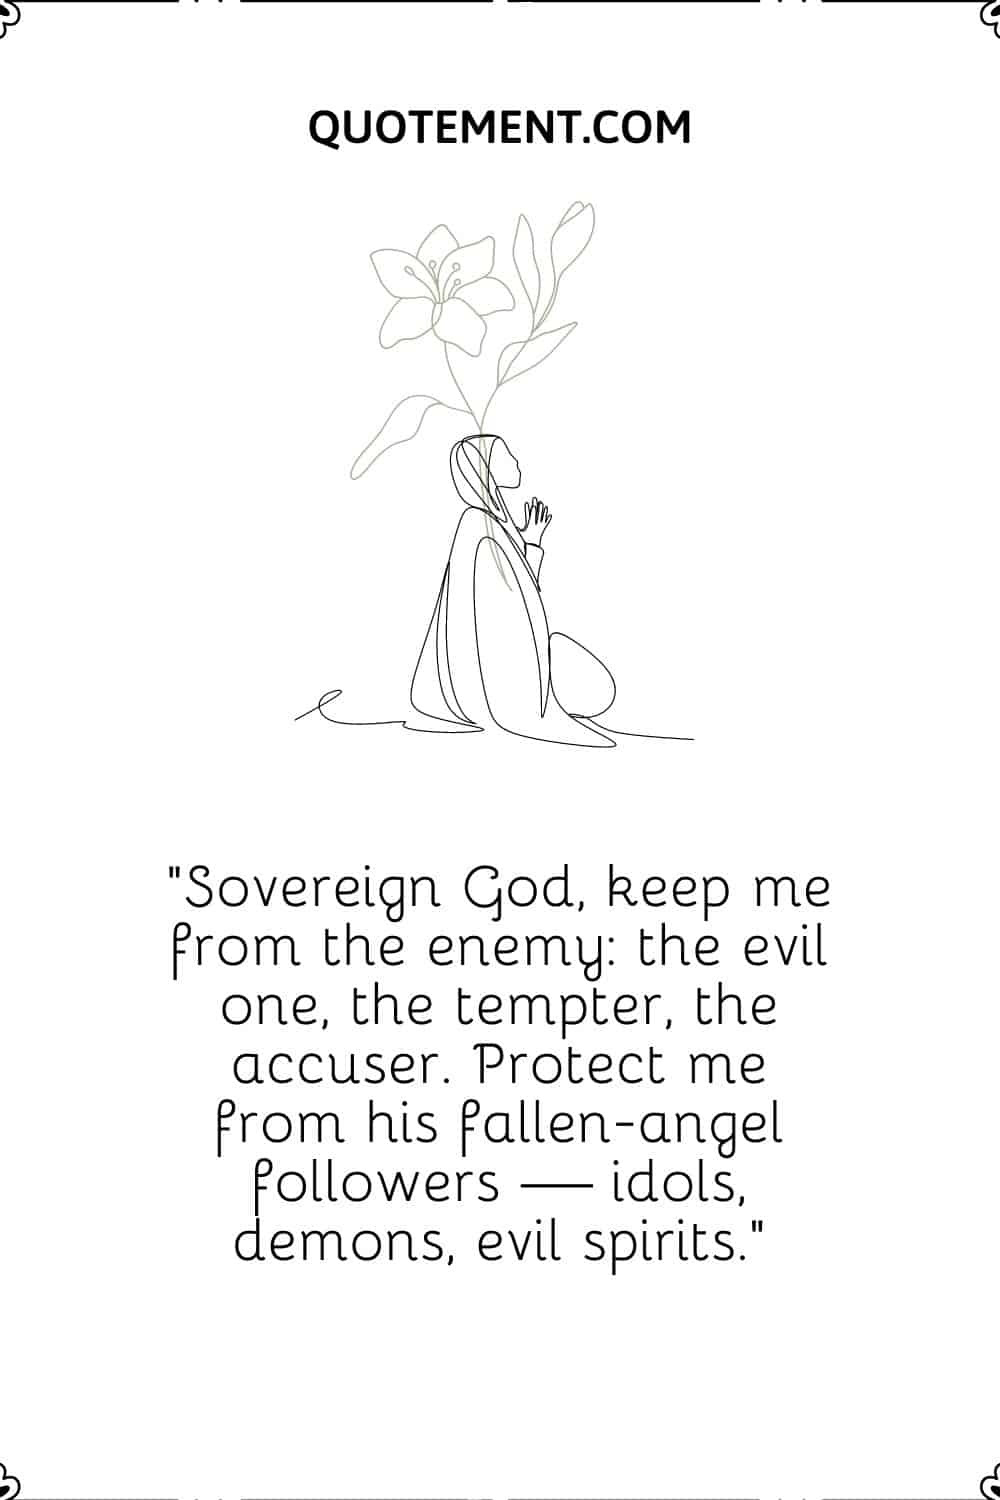 Sovereign God, keep me from the enemy the evil one, the tempter, the accuser